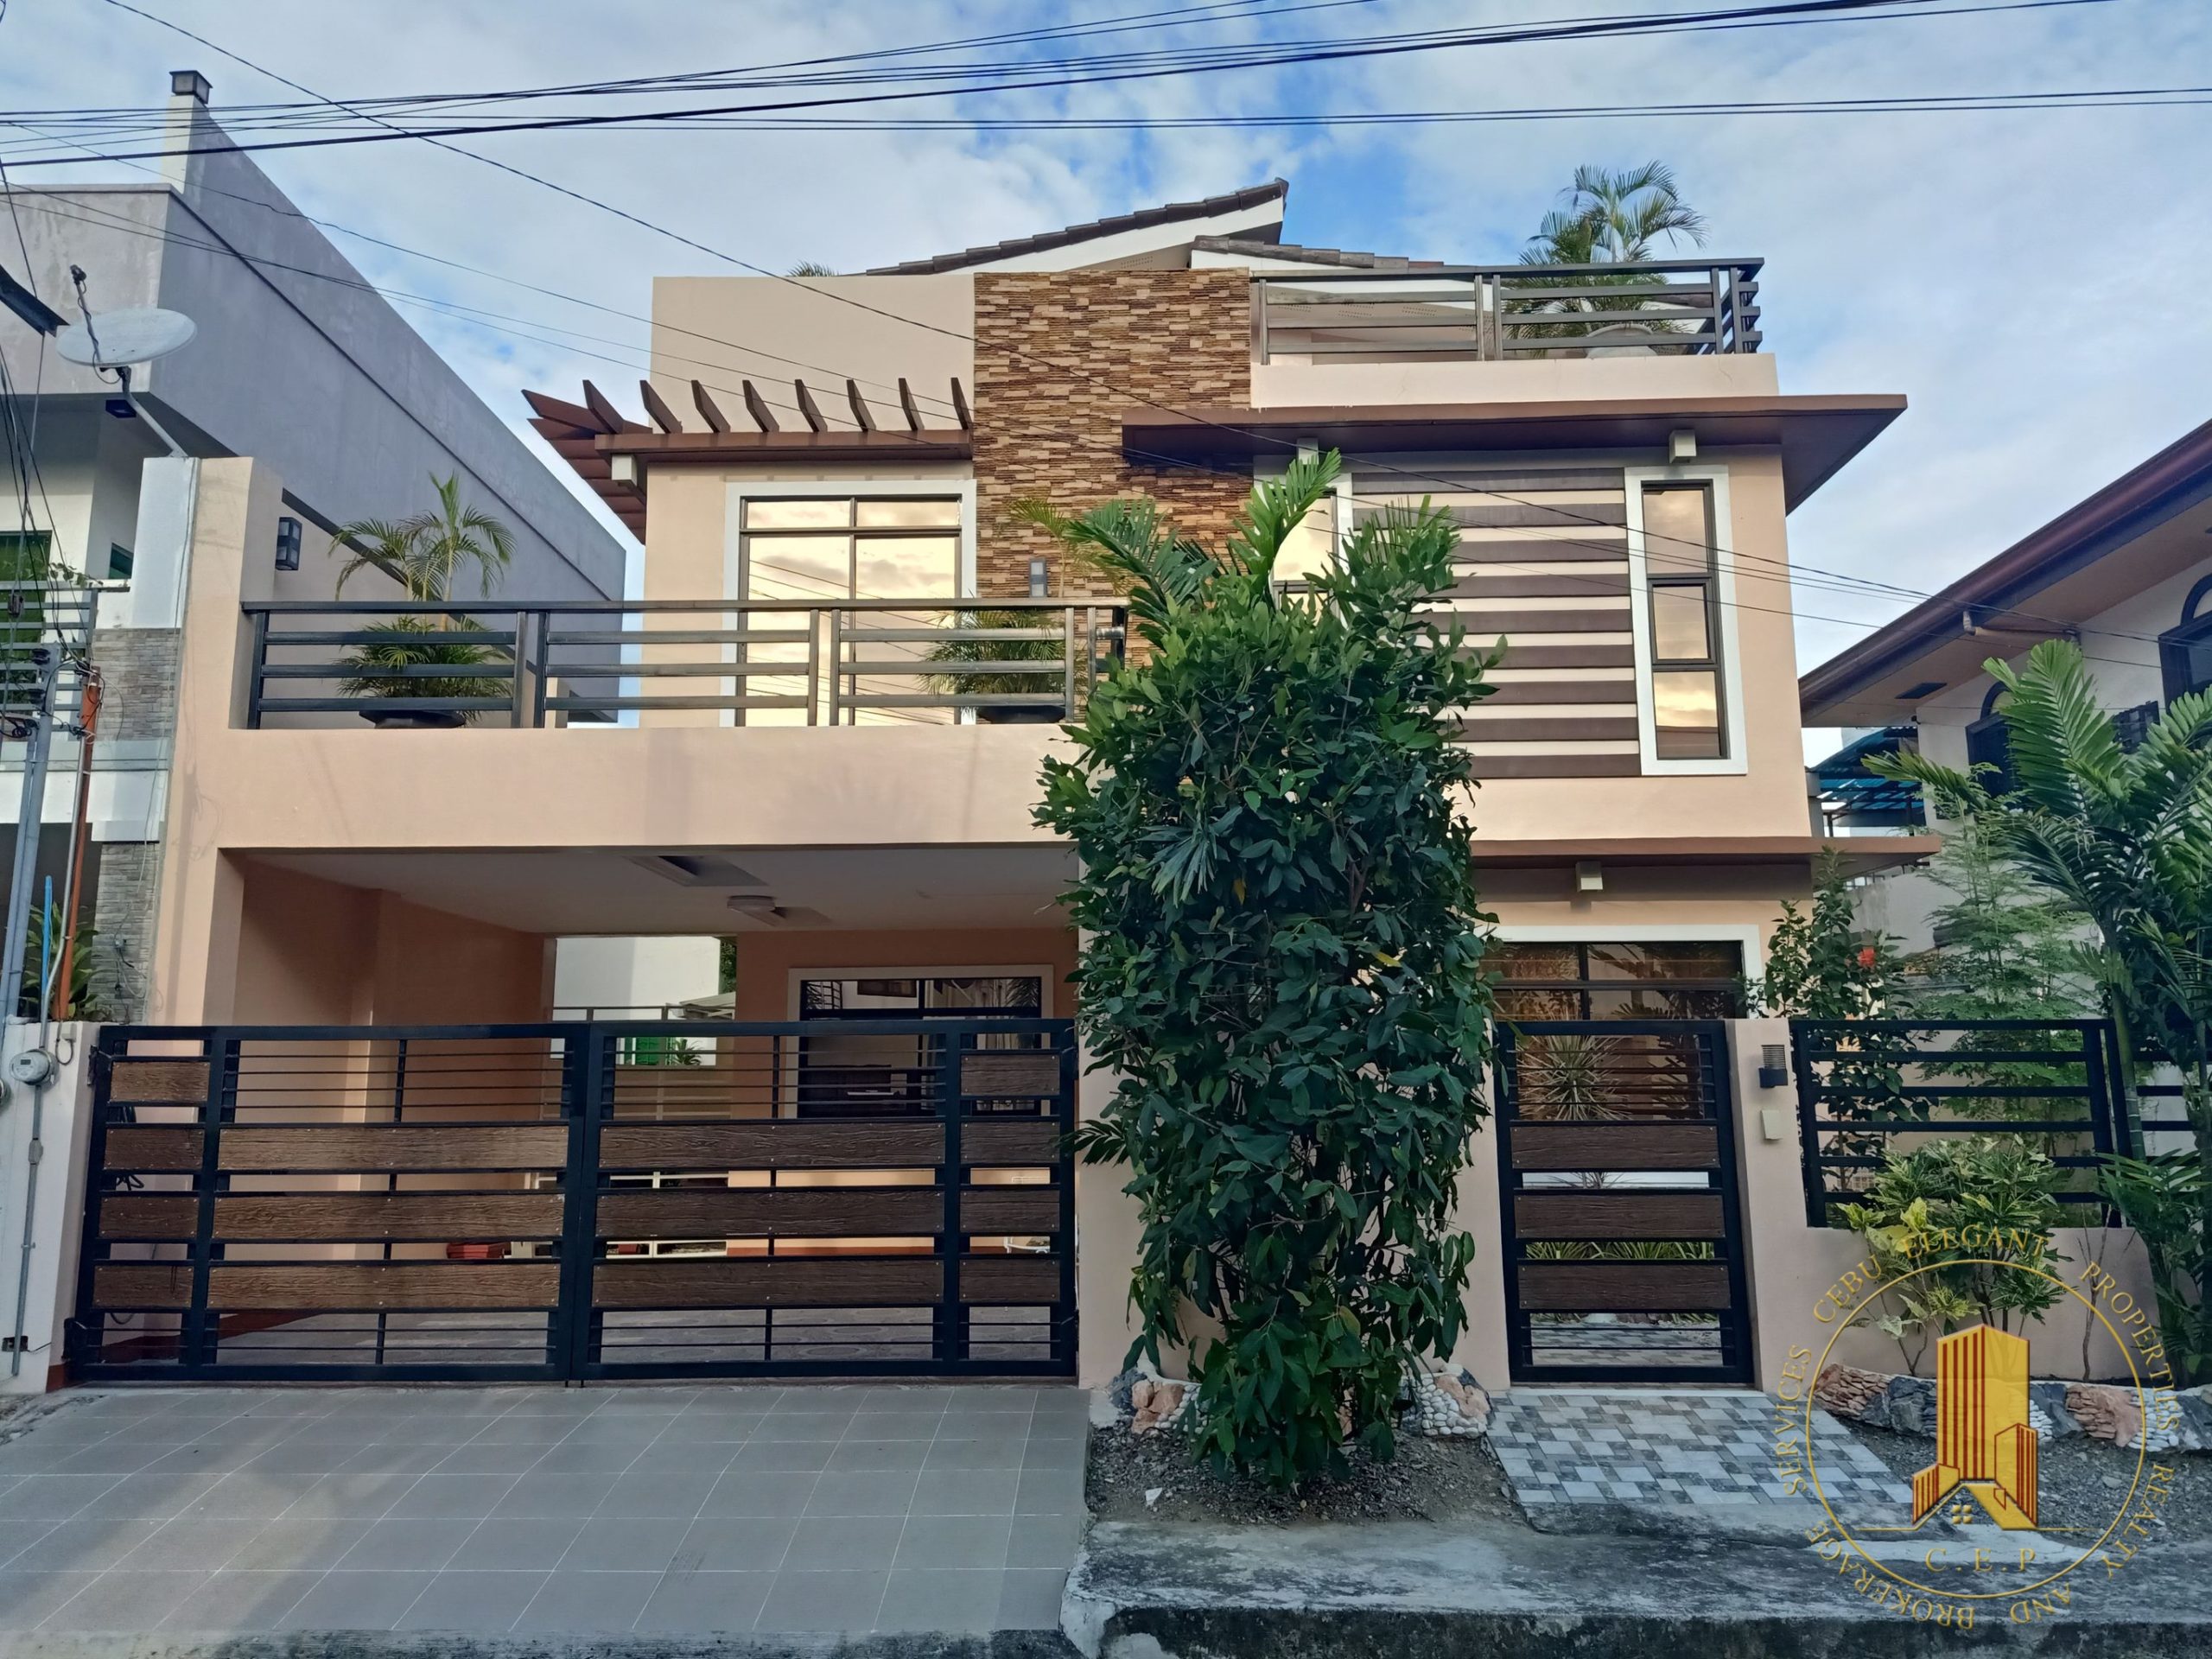 For Rent: 4 Bedroom House in Desana Heights, E. Sabellano St.